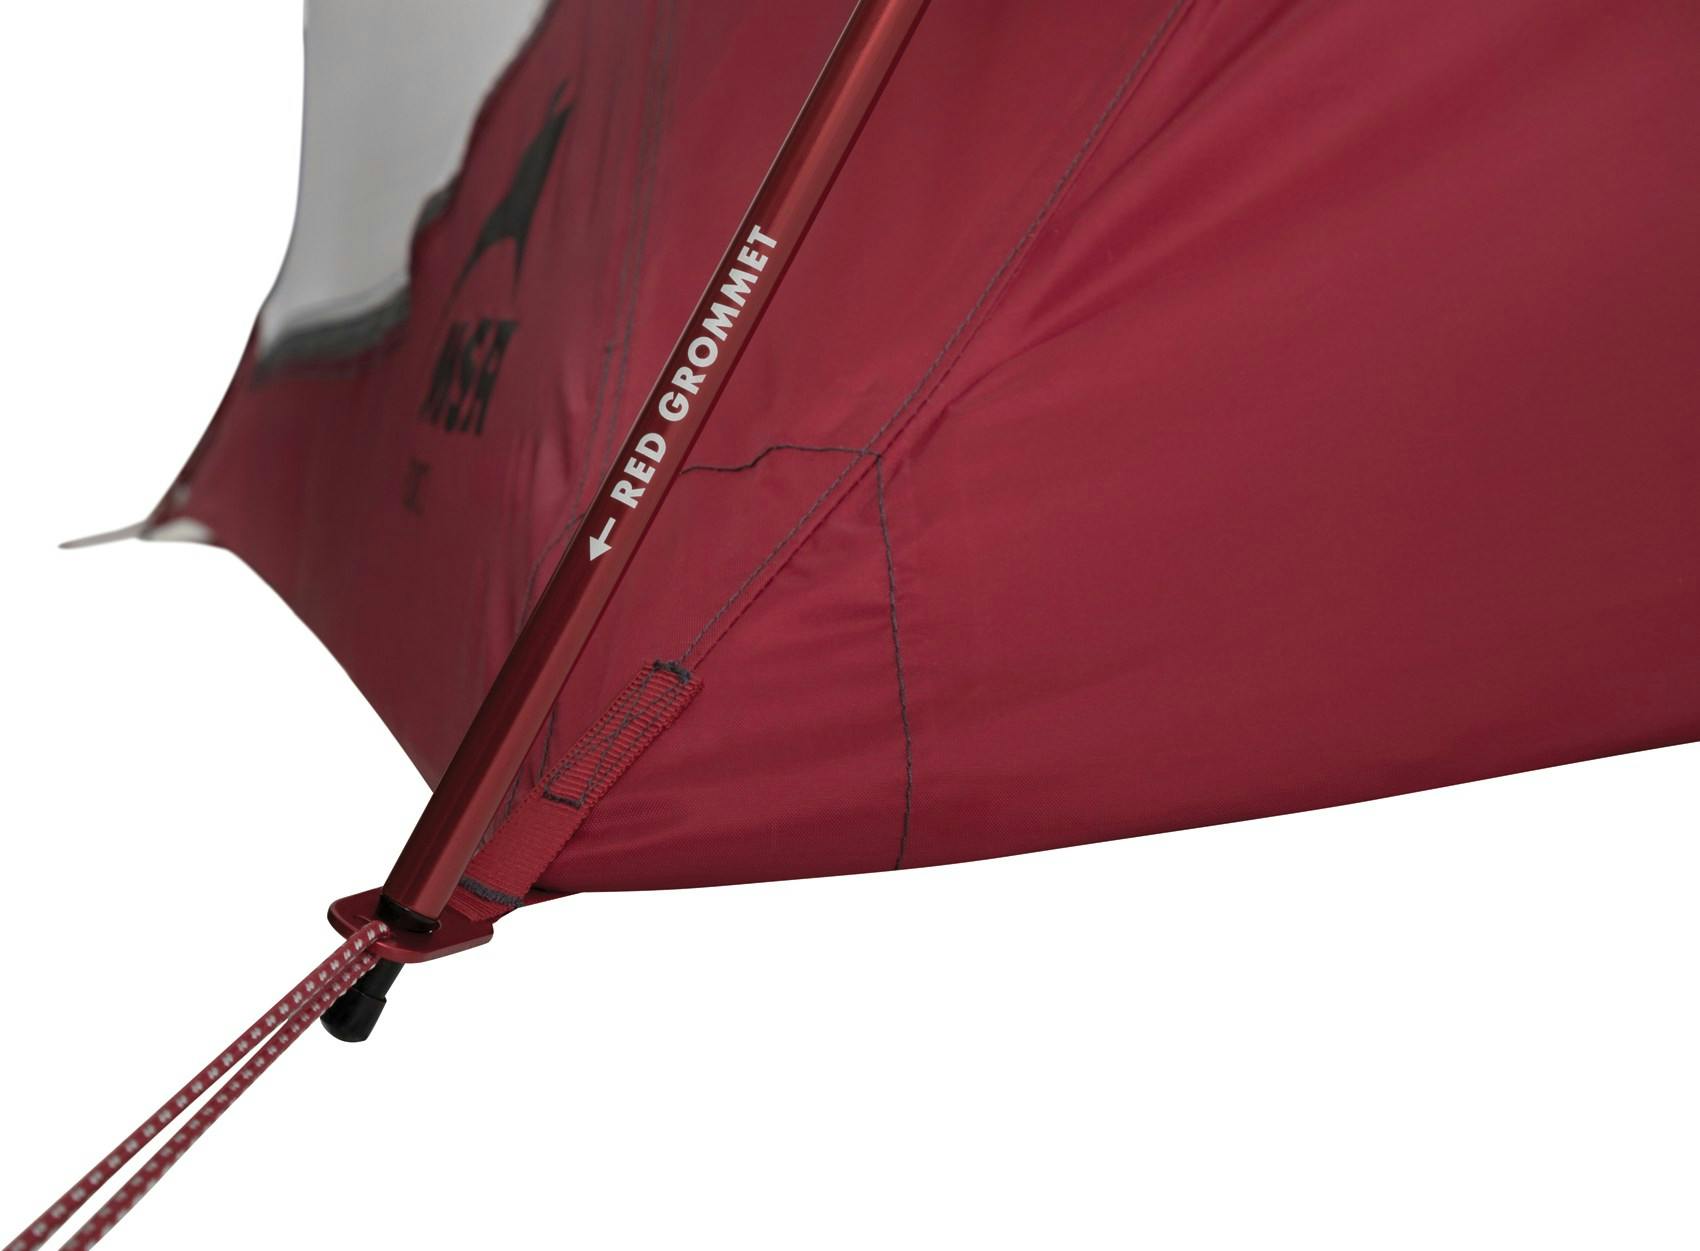 MSR Elixir 4 Person Tent · Gray/Red